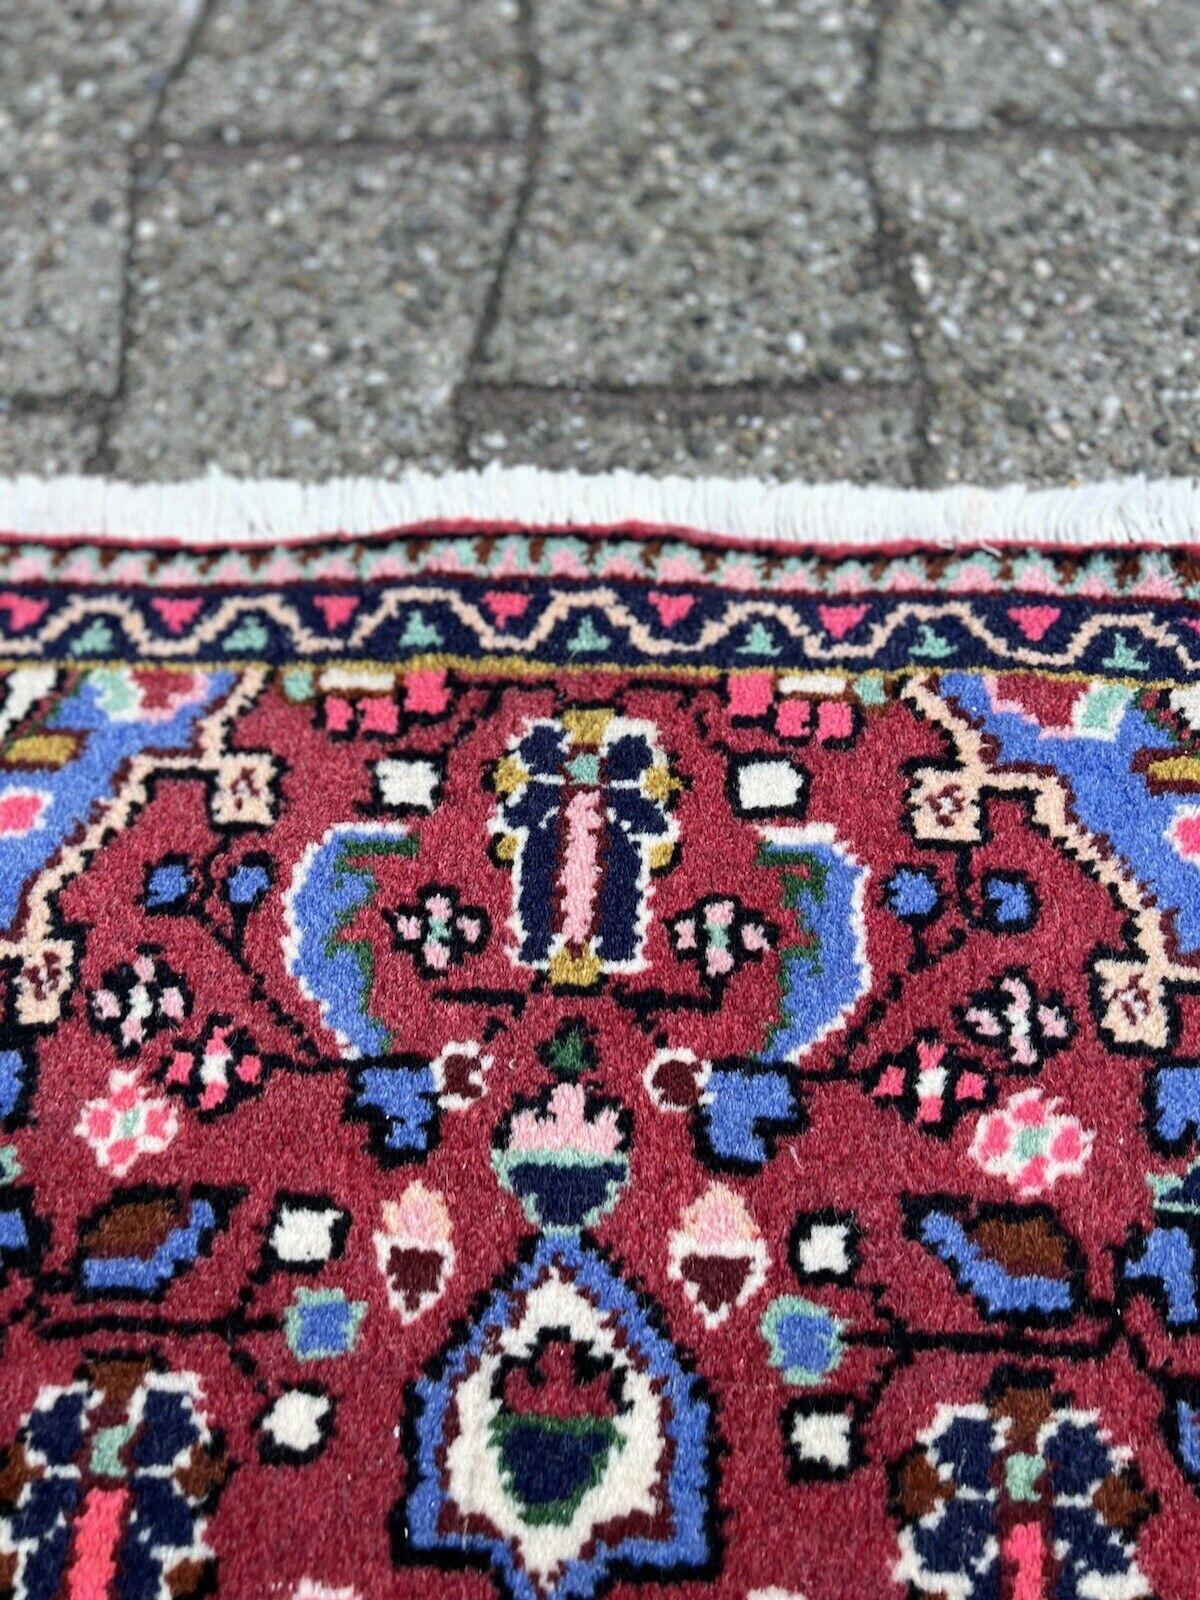 Add a splash of color to your space with this Handmade Vintage Persian Style Lilihan Rug. Dating back to the 1970s, this small rug measures 1.8’ x 2.9’ (55cm x 91cm) and is a vibrant showcase of traditional Persian craftsmanship.

The rug is made